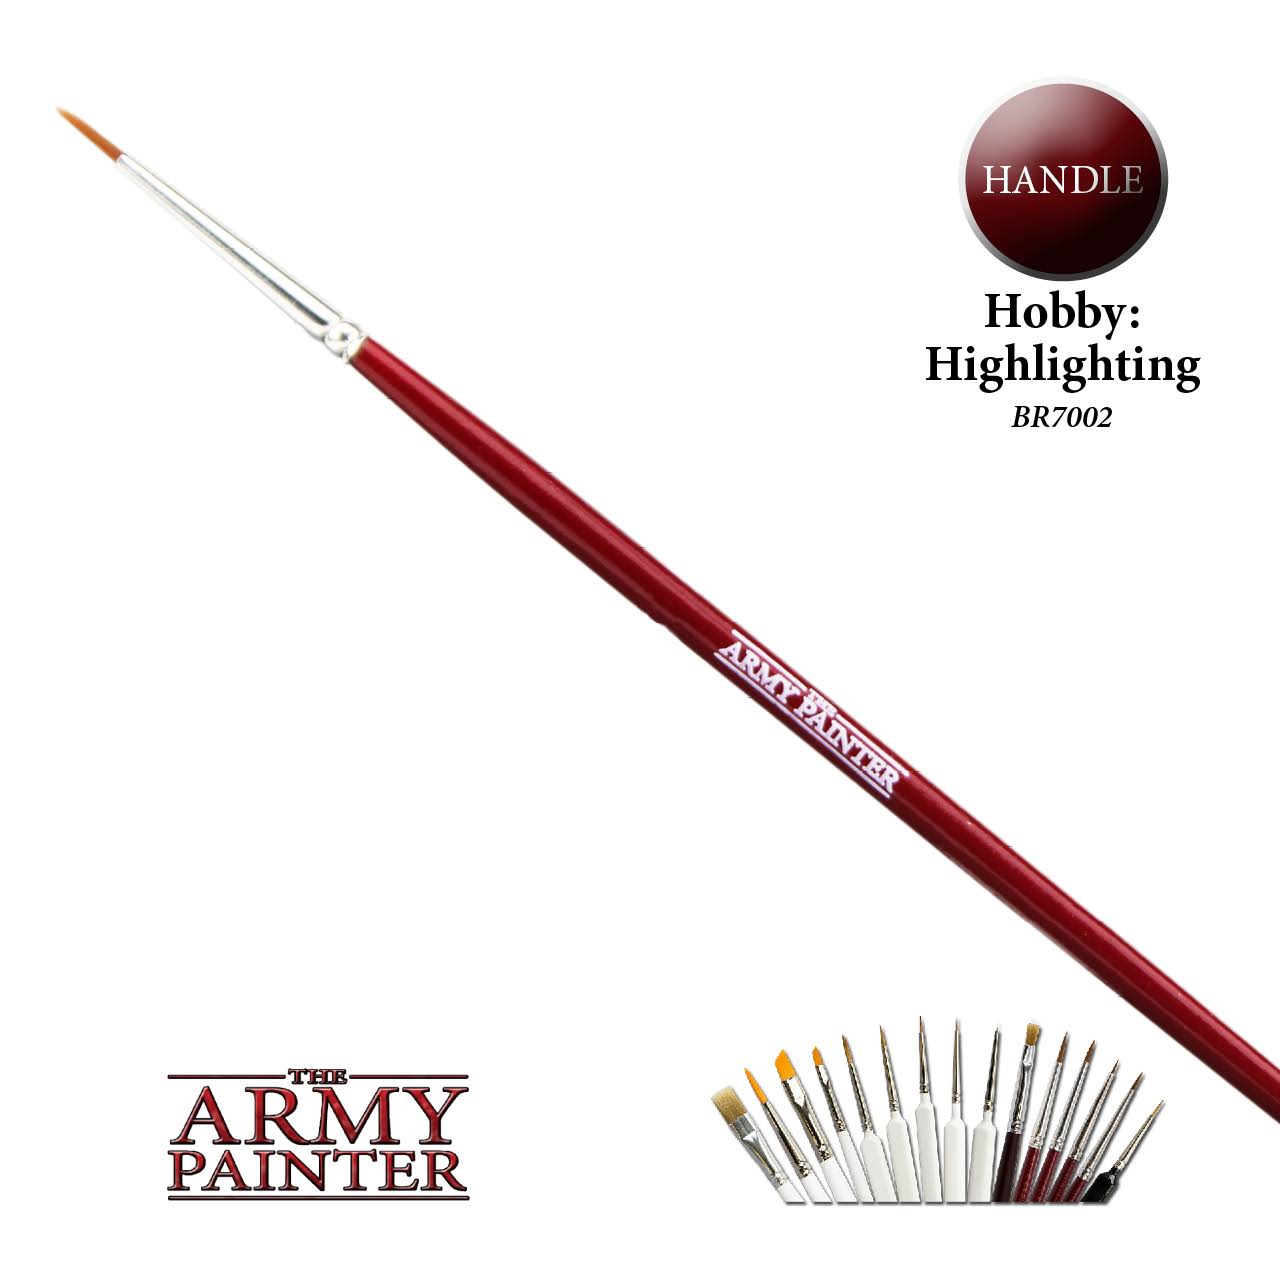 The Army Painter BR7002 Hobby Highlighting Paint Brush